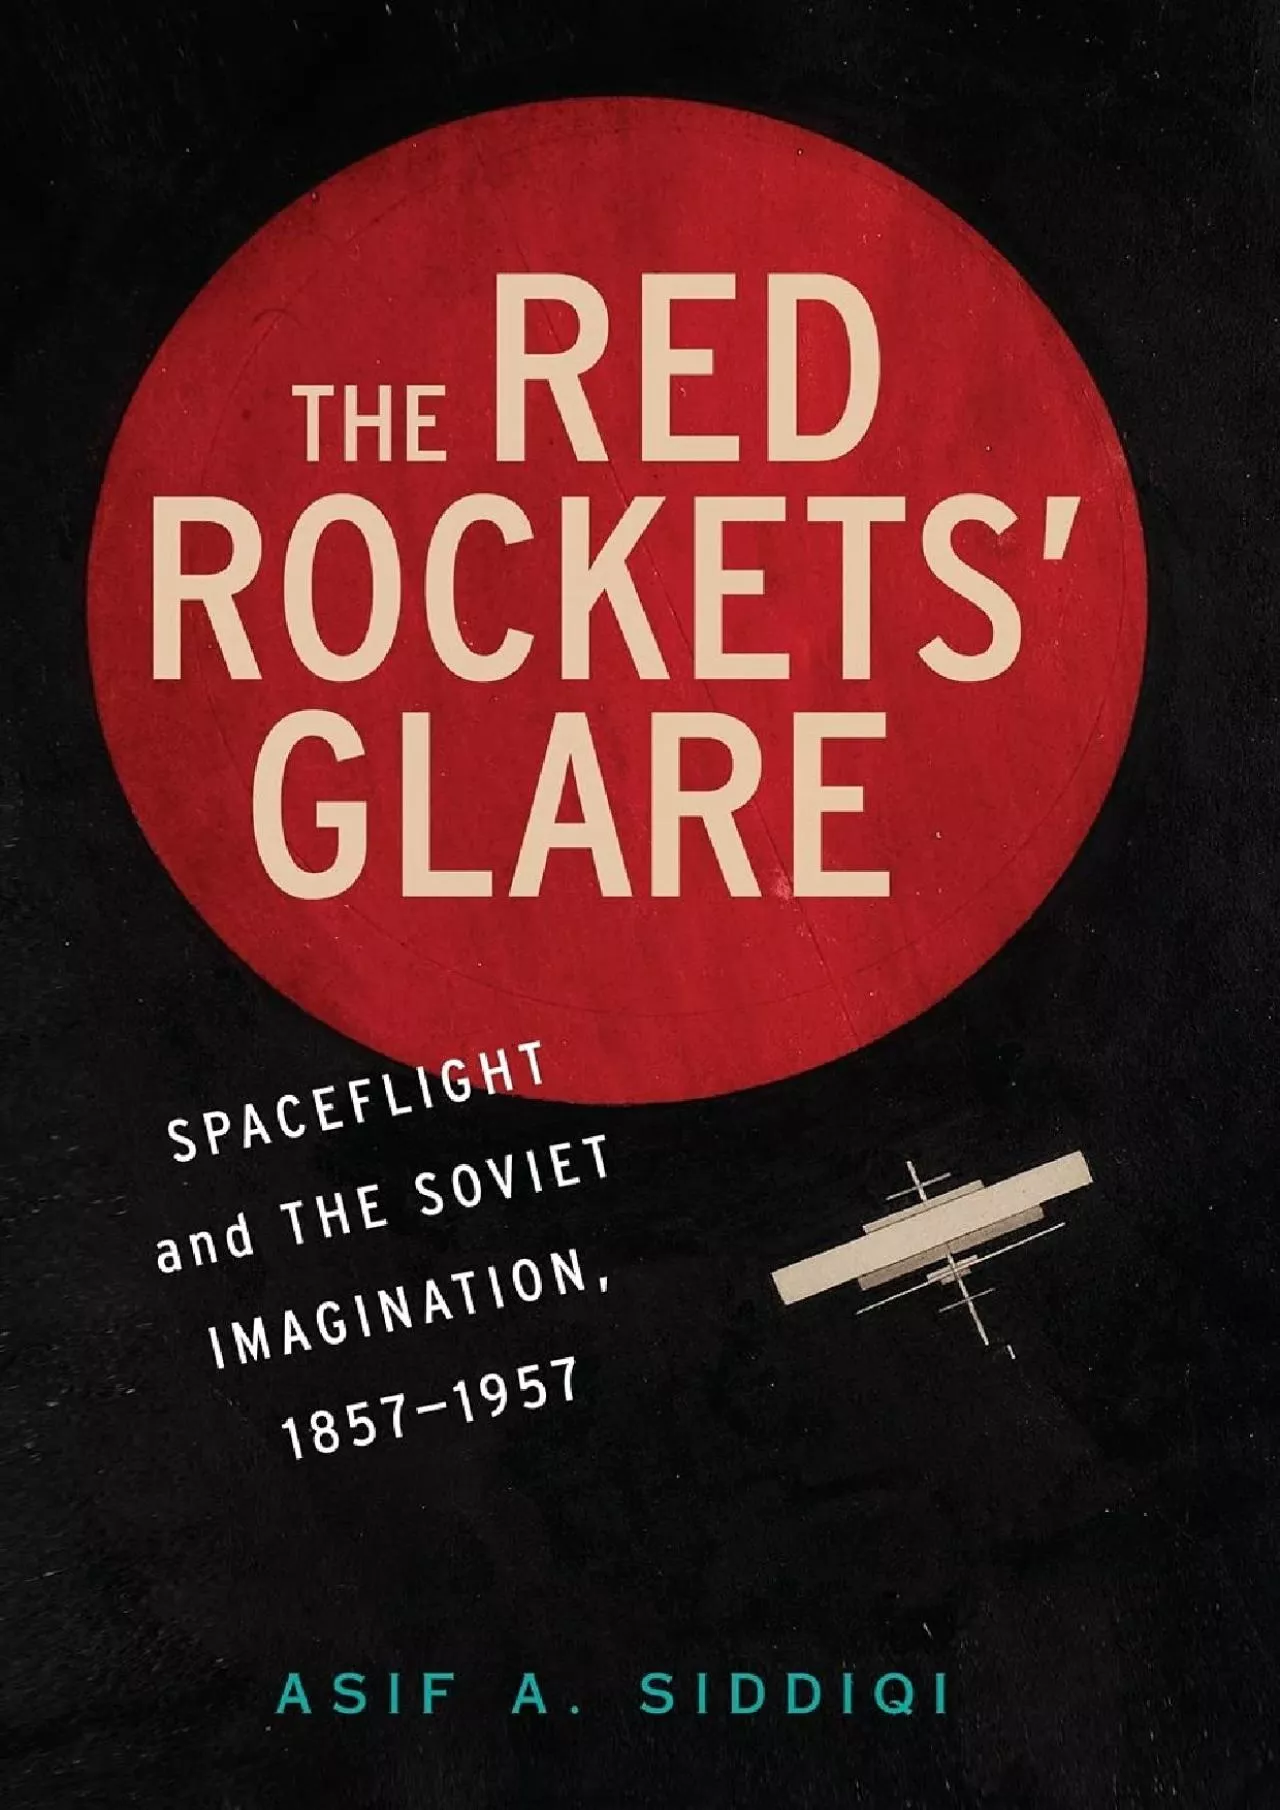 (BOOK)-The Red Rockets\' Glare: Spaceflight and the Russian Imagination, 1857–1957 (Cambridge